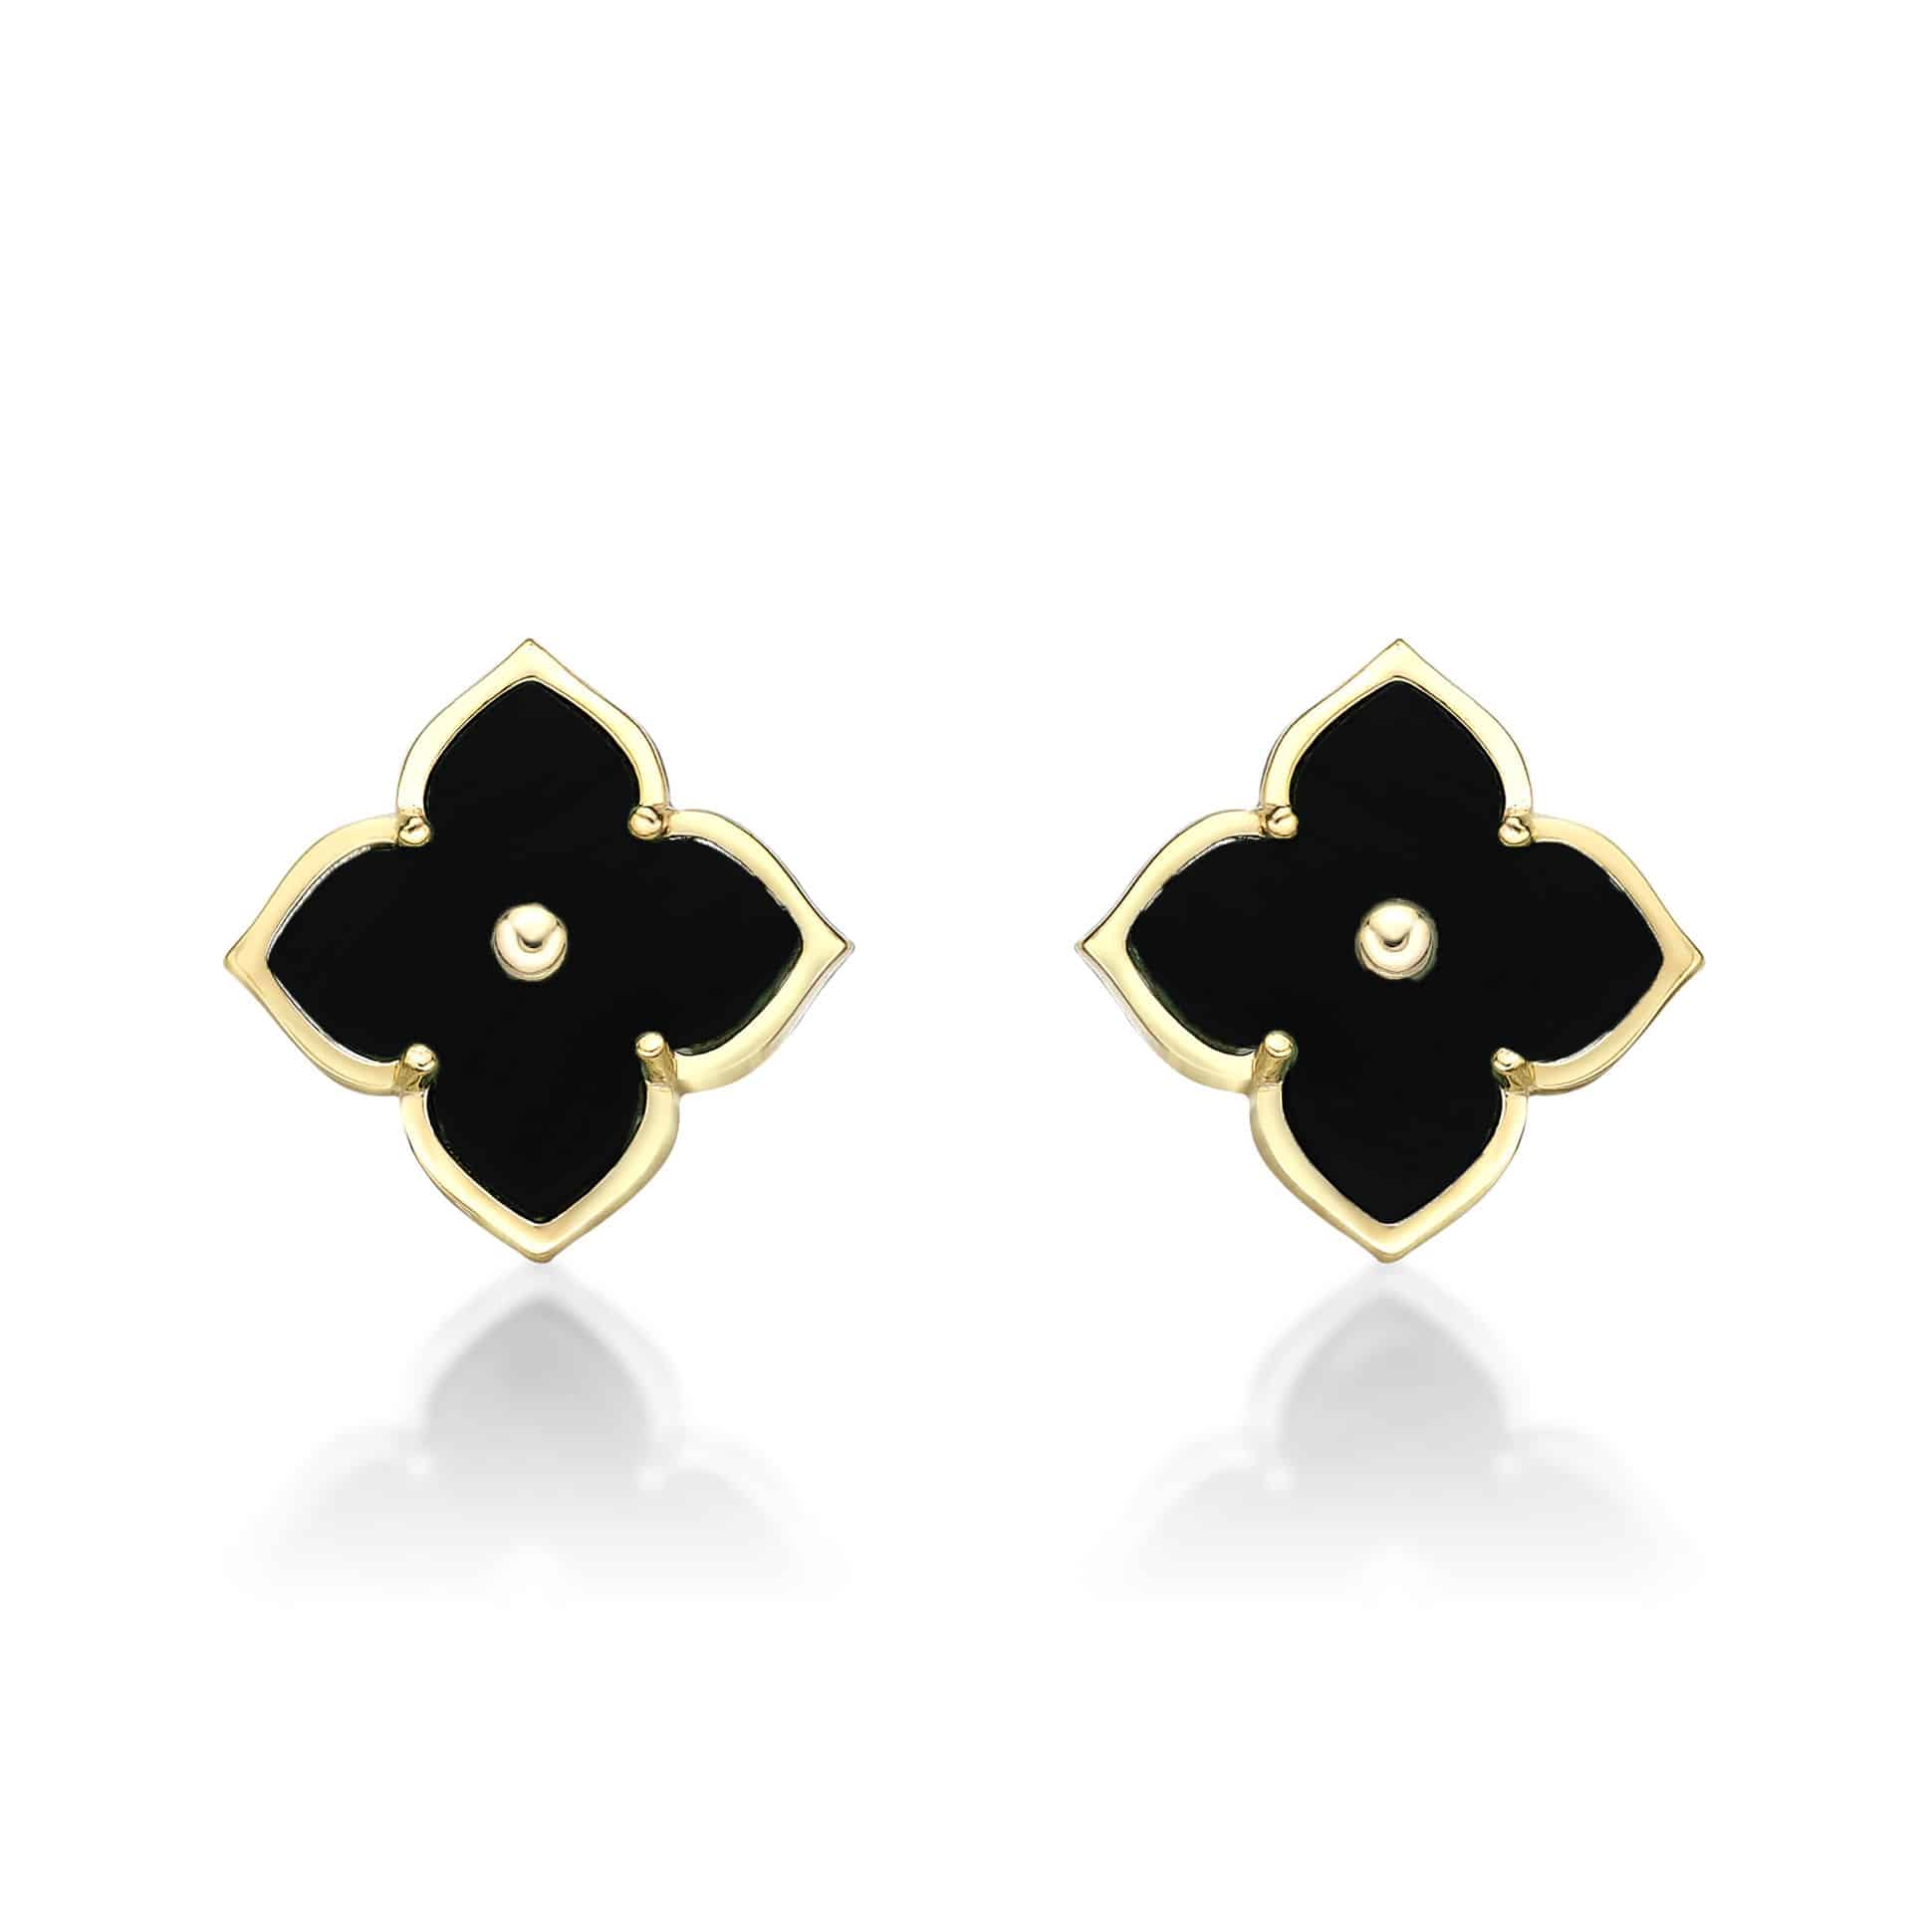 Women's Black Onyx Flower Stud Earrings in Yellow Gold Plated Sterling Silver with Cubic Zirconia | Lavari Jewelers